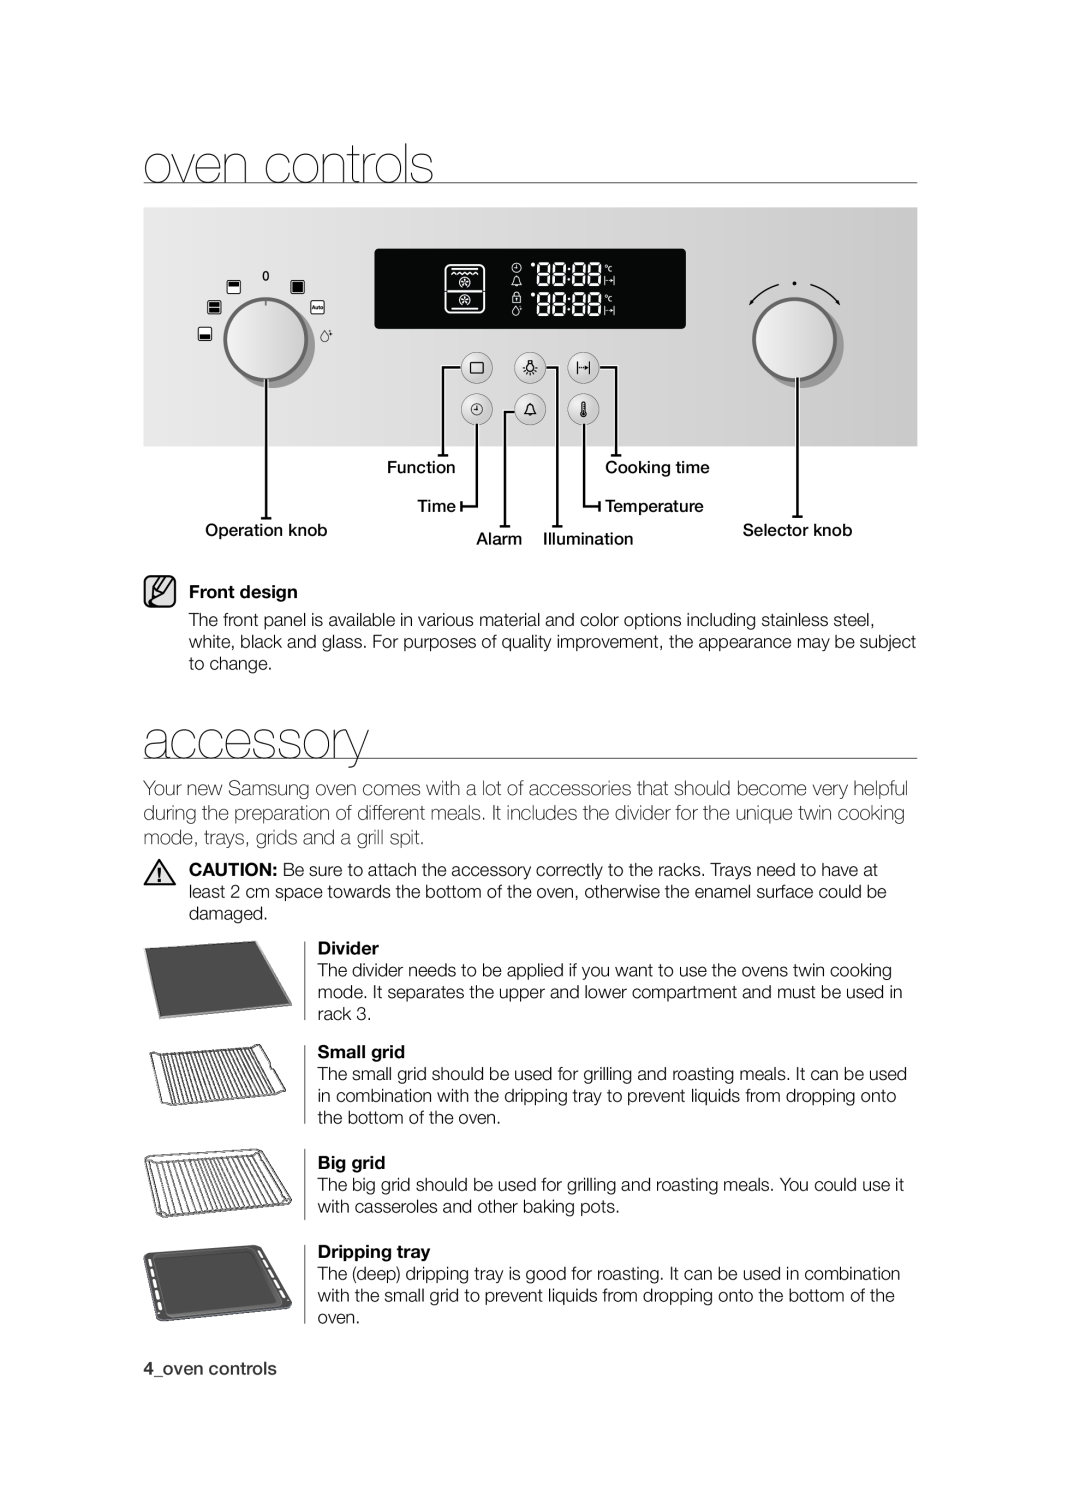 Samsung BT621 Series user manual accessory, 4oven controls, Front design, Divider, Small grid, Big grid, Dripping tray 